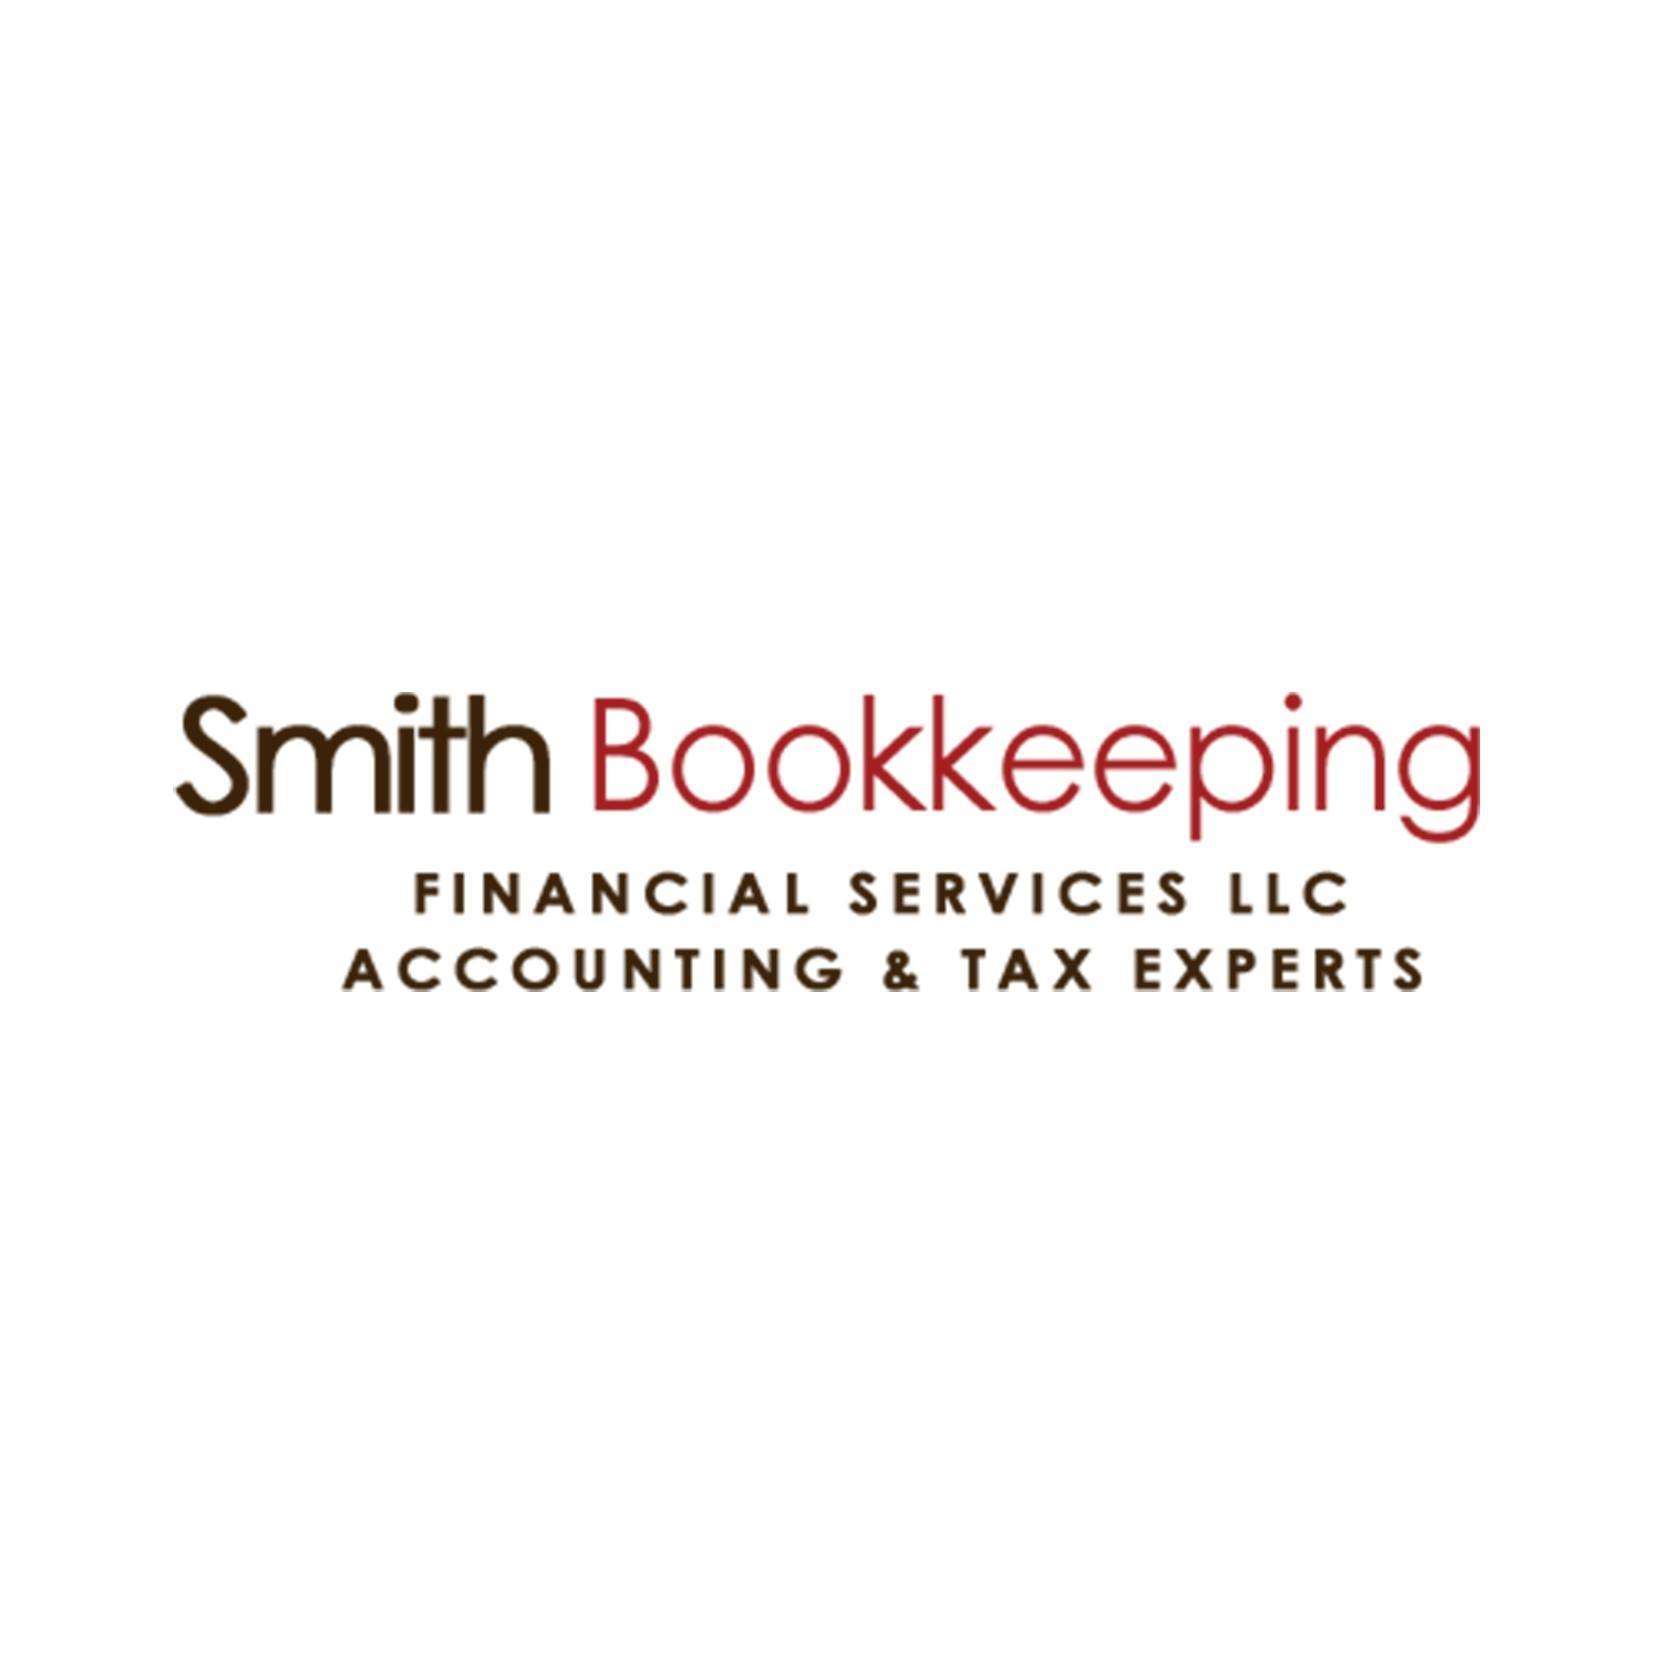 Smith Bookkeeping Financial Services LLC Logo